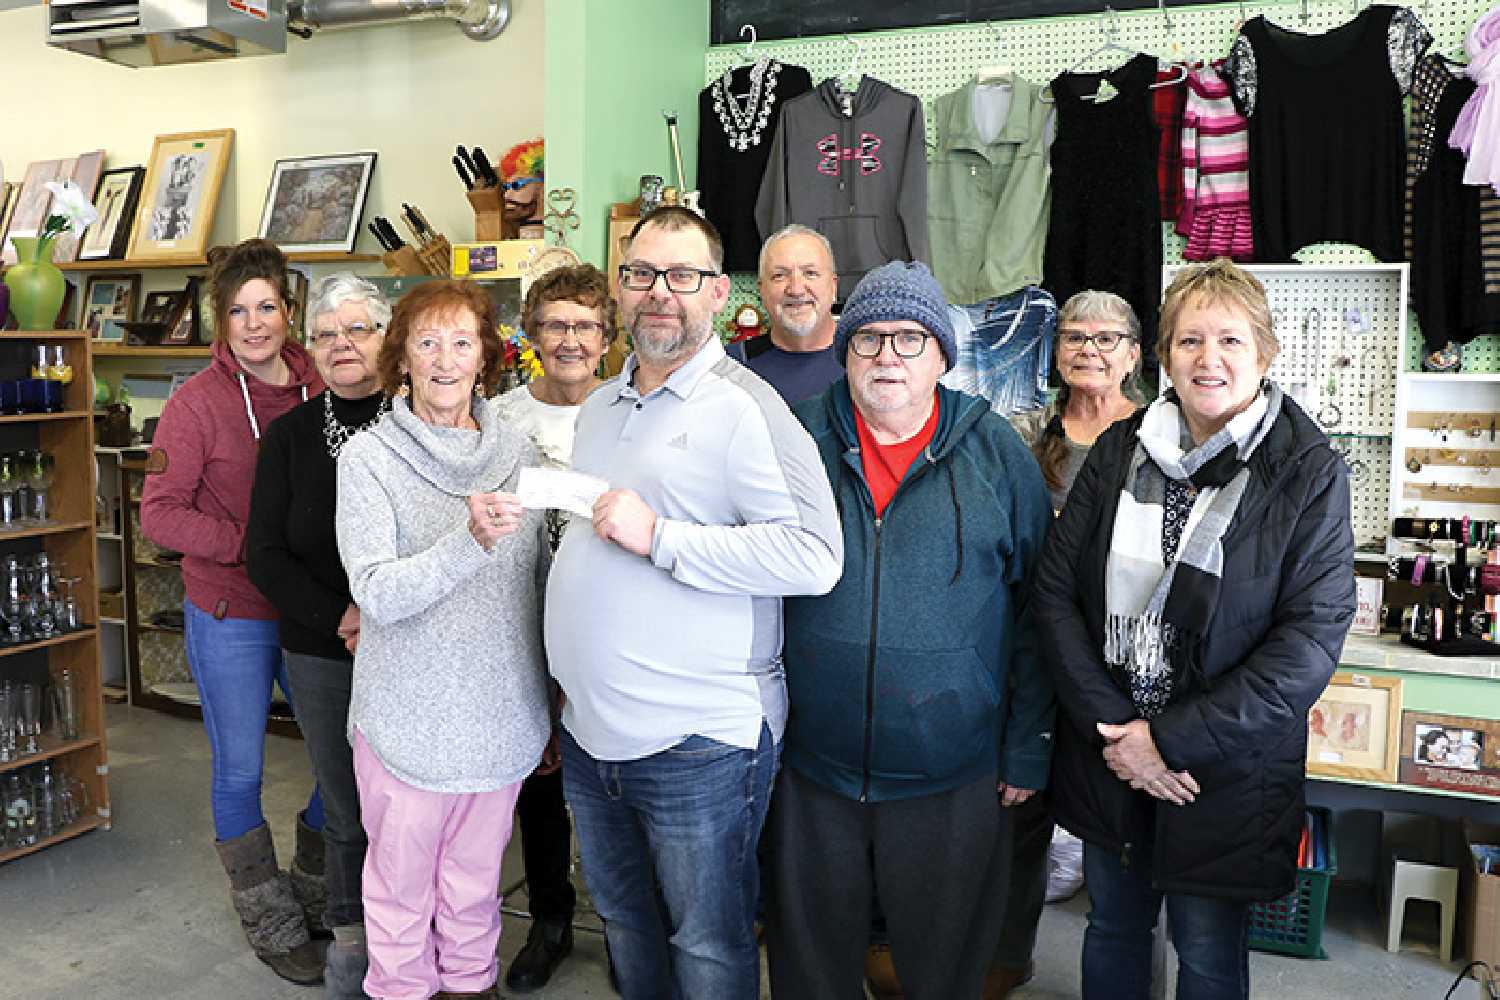 Last Tuesday, the Rocanville Thrift Store donated $10,000 to the Moosomin and District Health Care Foundation in support of funding a CT Scanner for the hospital. <b>From left are,</b> volunteers of the thrift store Kim Wahoski, Joyce Surridge, Linda Bock, Marjorie Thompson, Mayor of Rocanville and member of Moosomin and District Health Care Foundation Ron Reed, volunteers for the thrift store Willie Restau, Paul Bunz, and Alma Ducharme, and Wendy Lynd of the Moosomin and District Health Care Foundation.